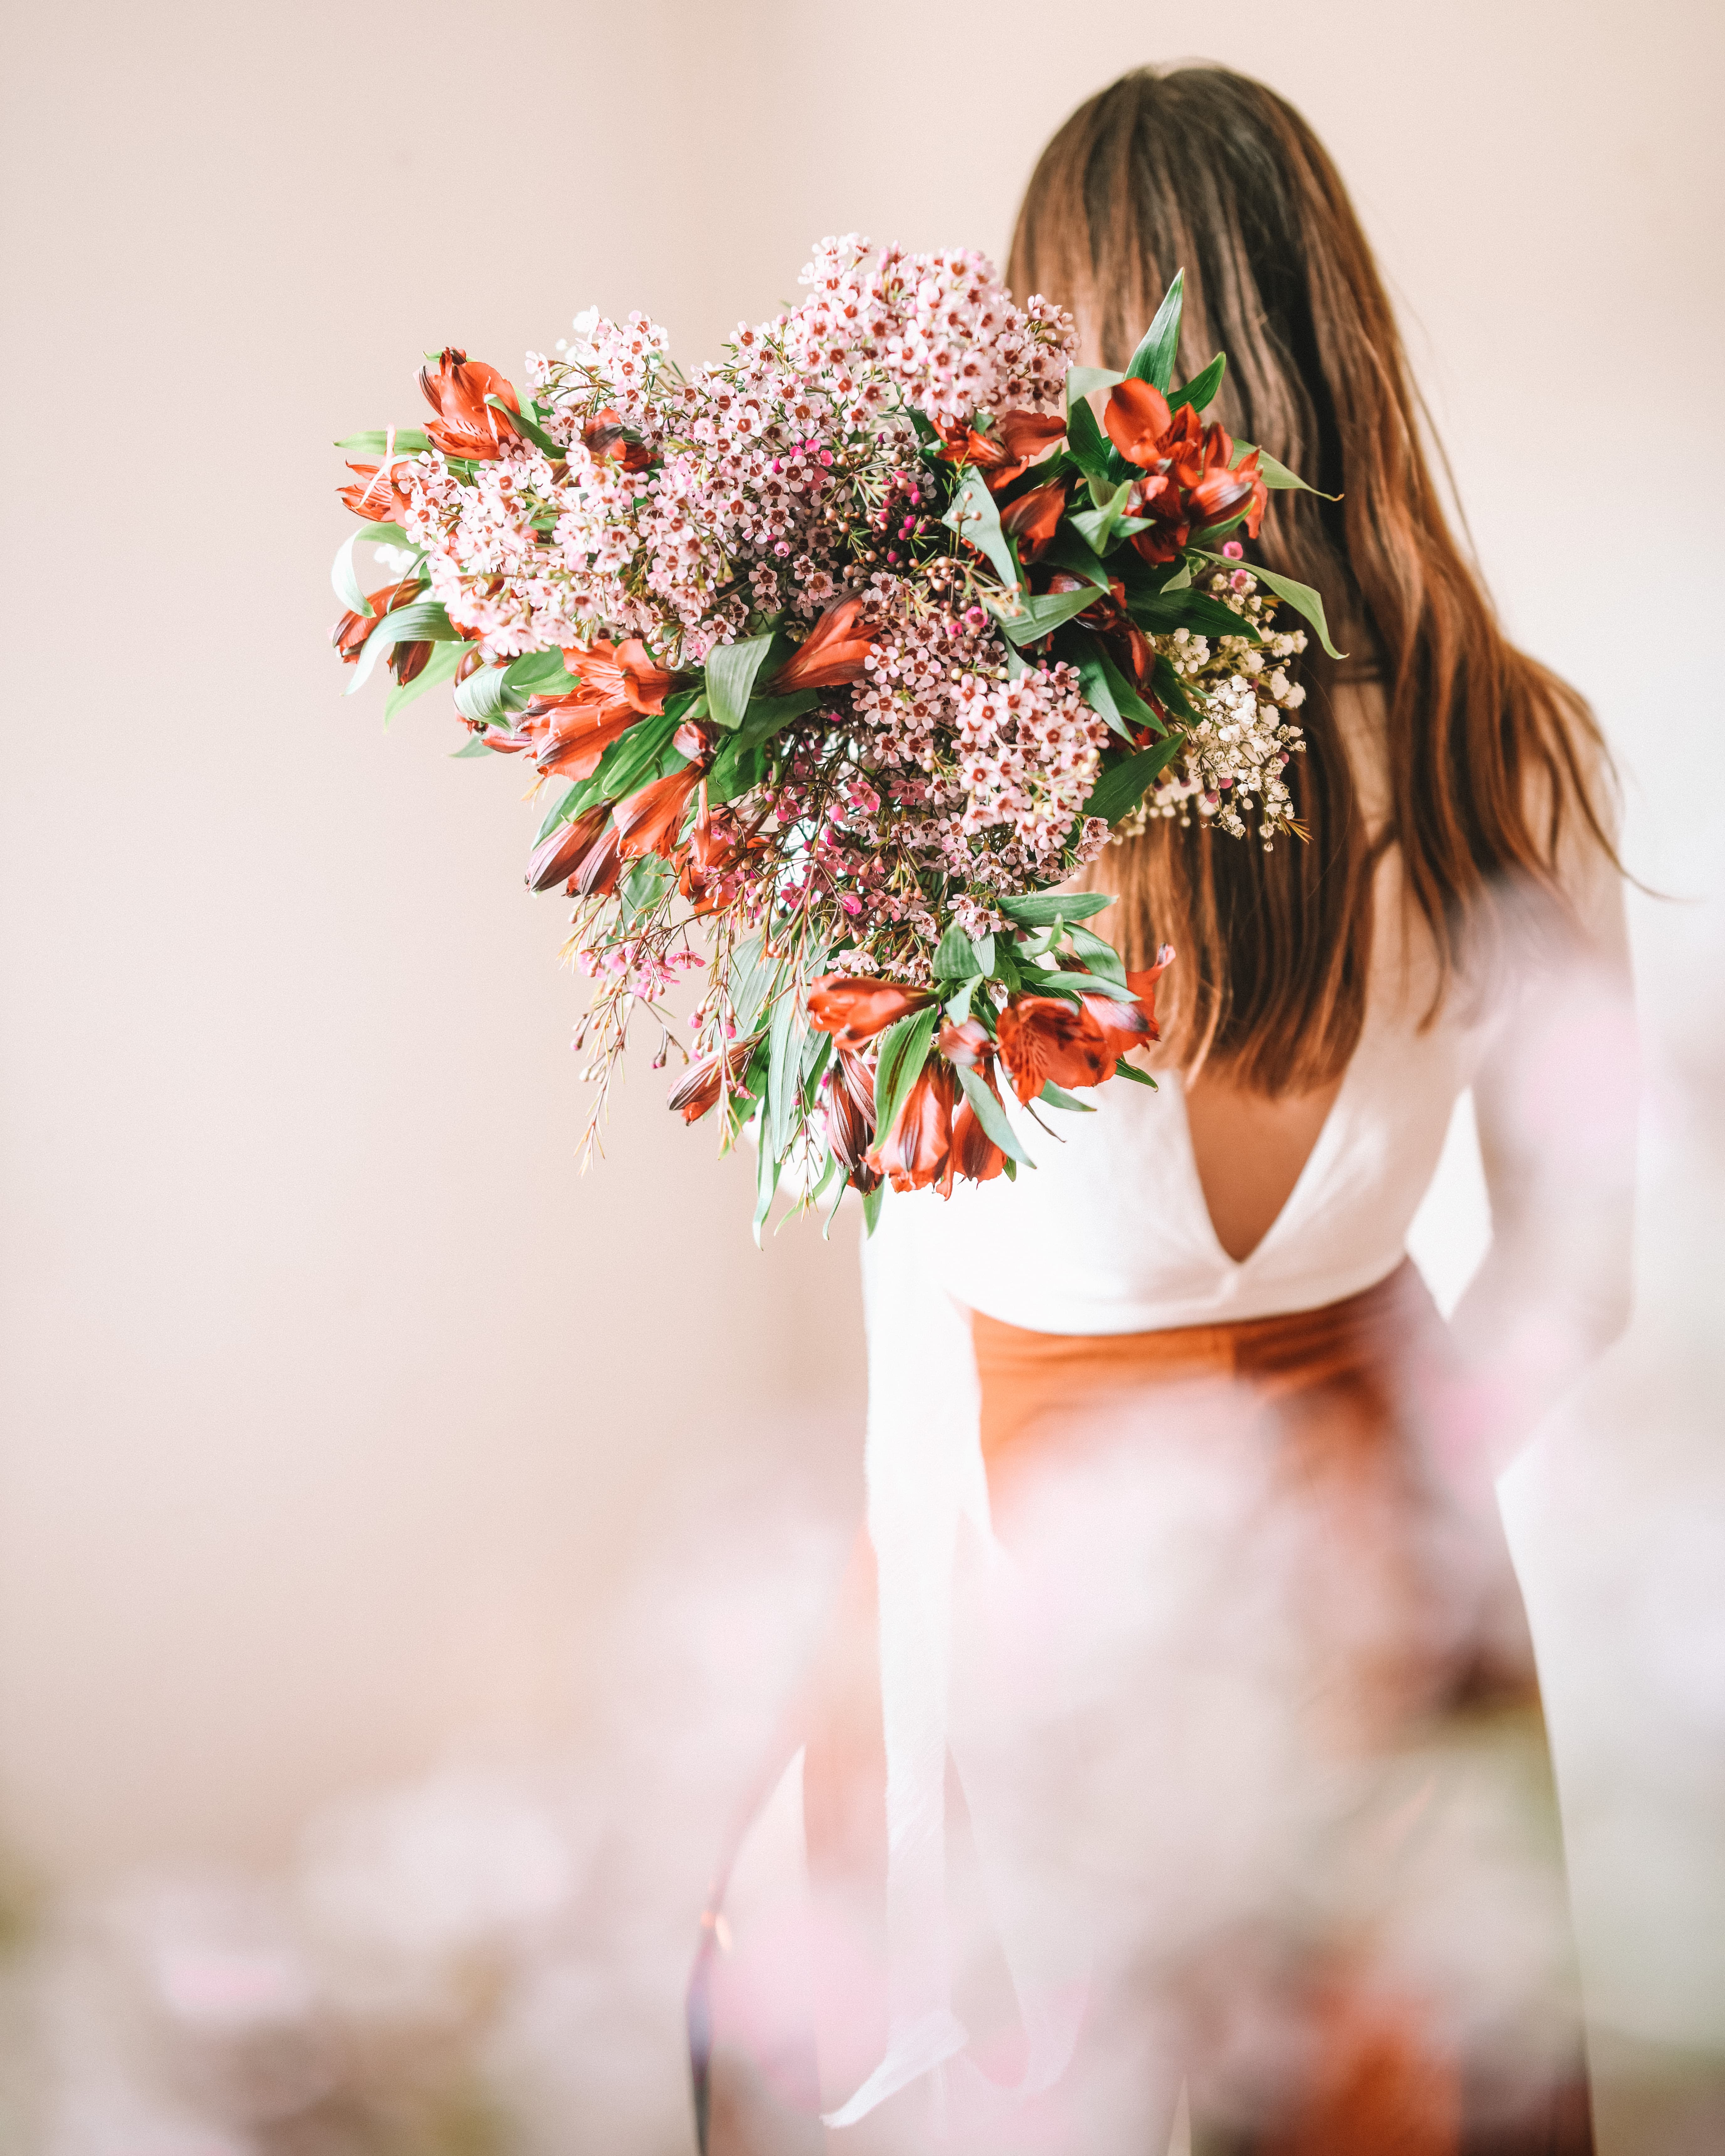 Girl with her back to the camera holding bouquet